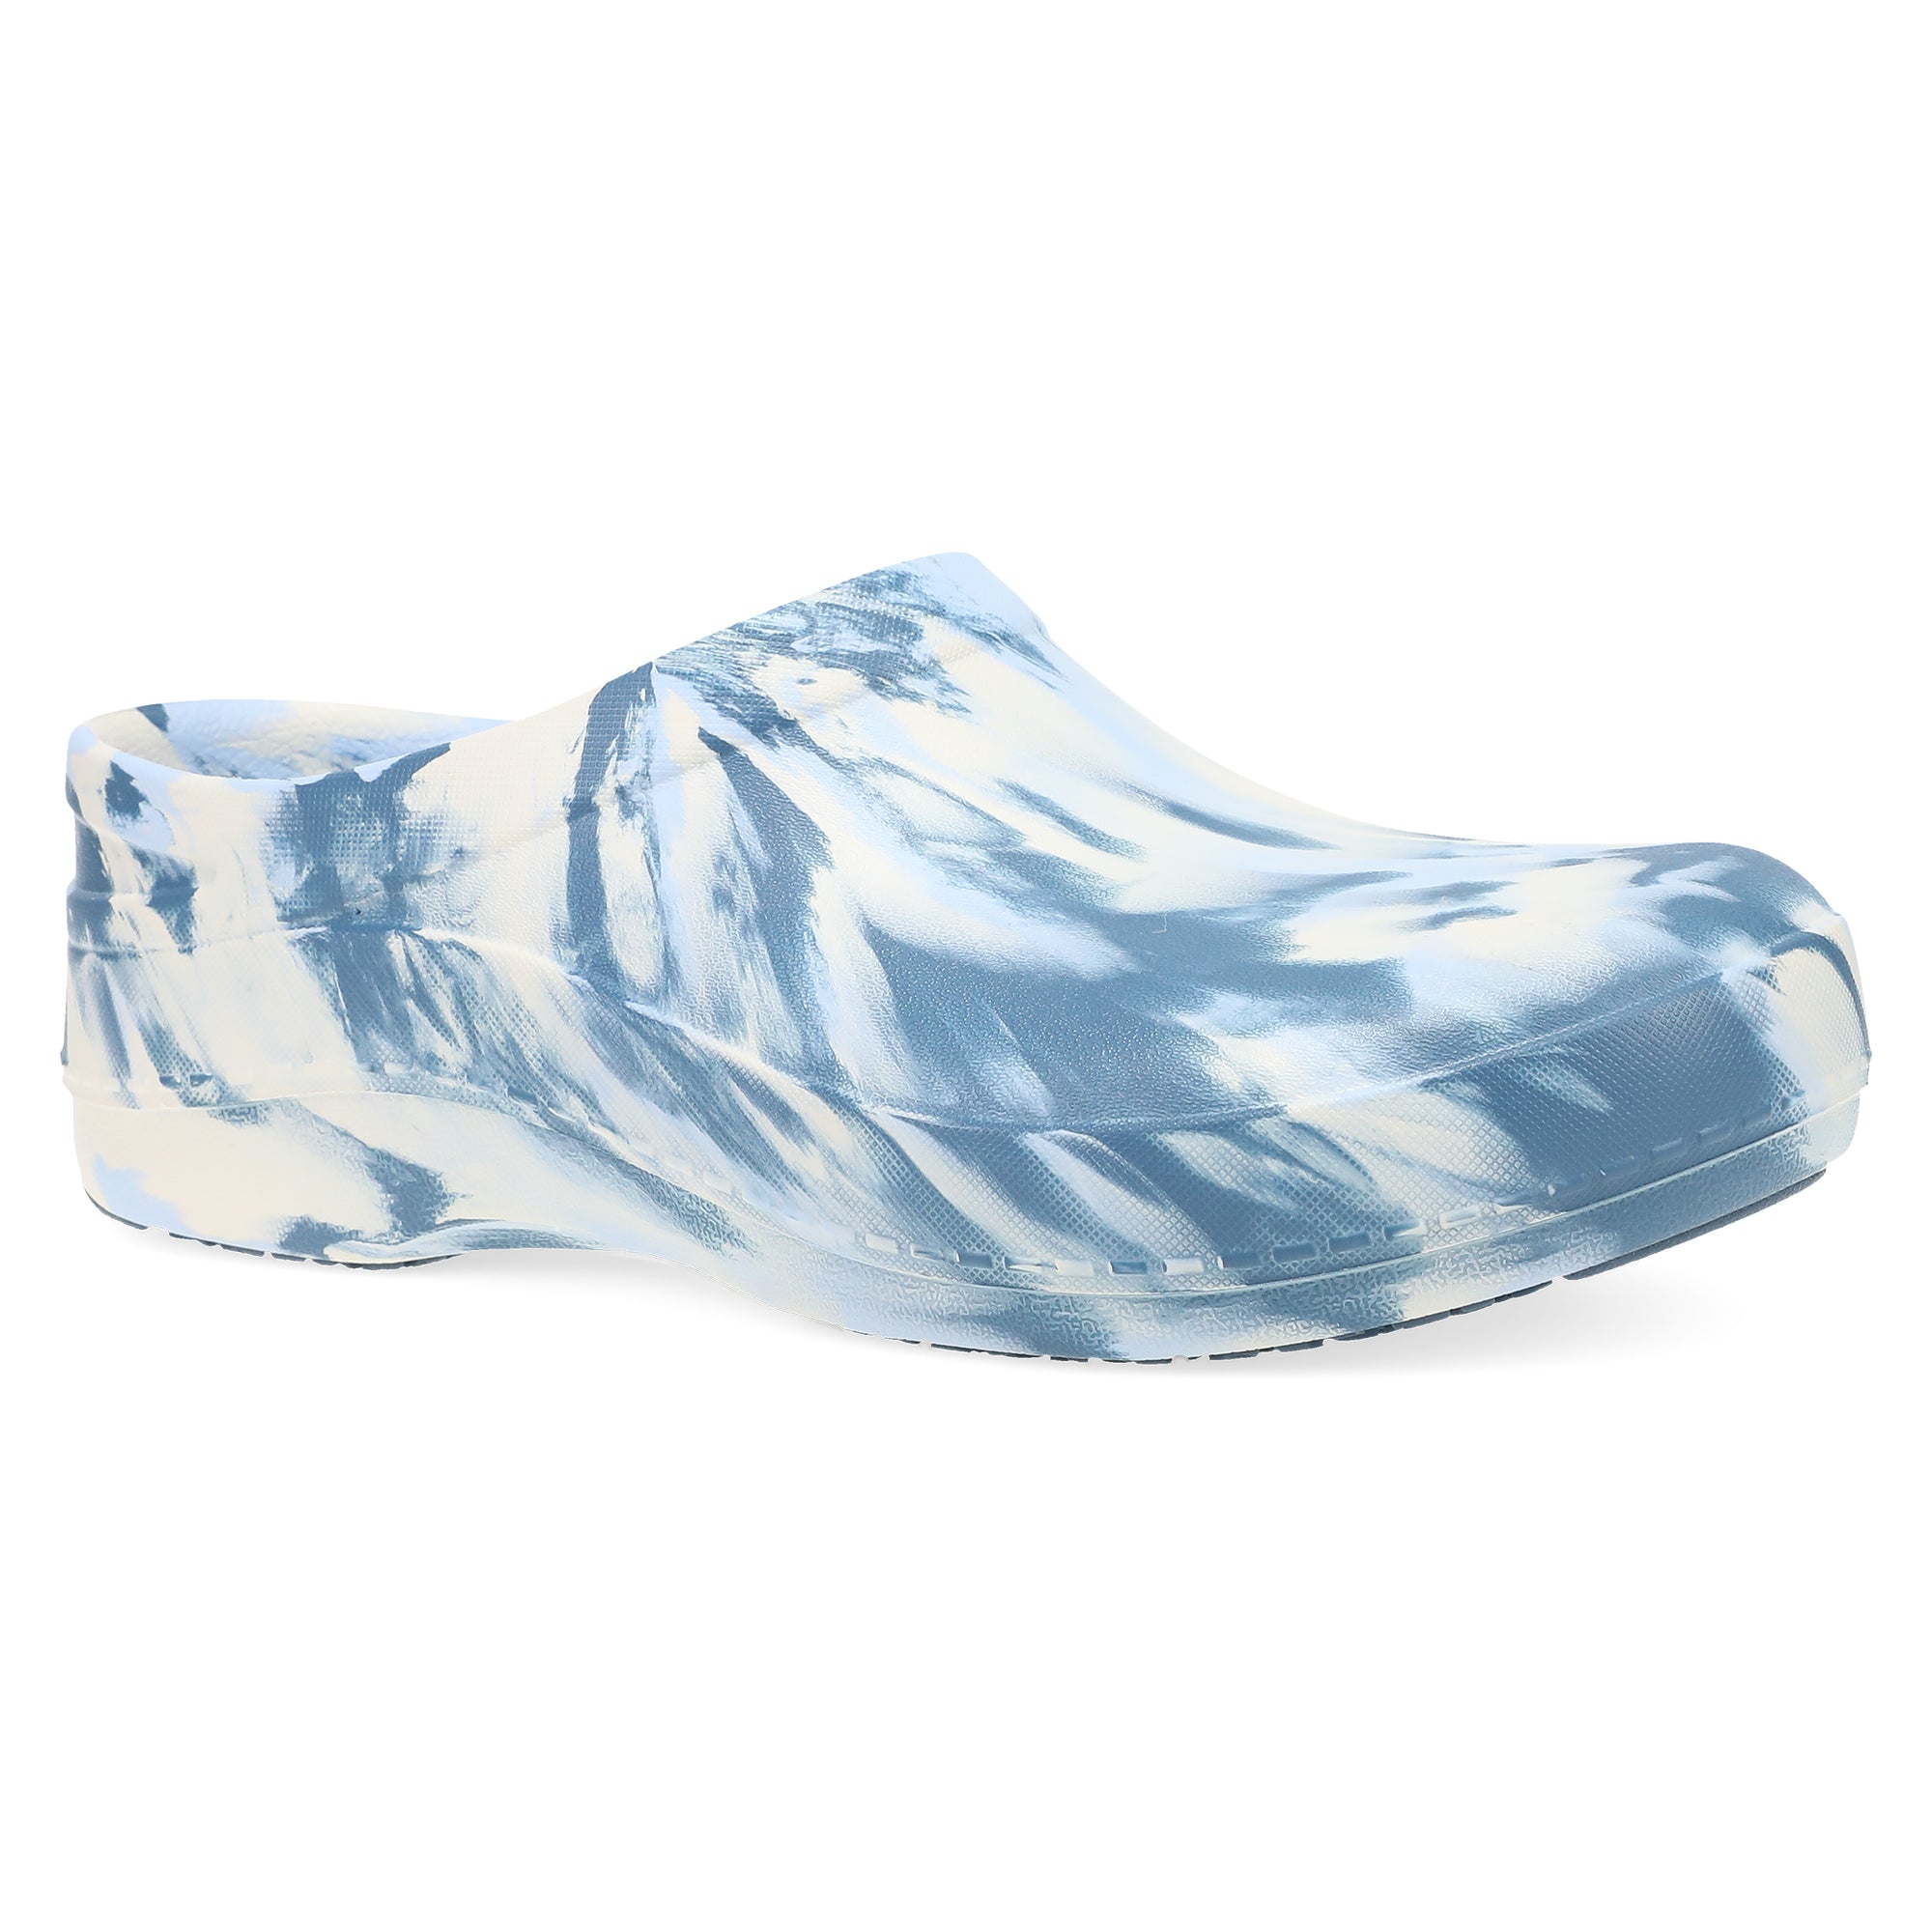 Primary image of Kaci Sky Marbled Molded